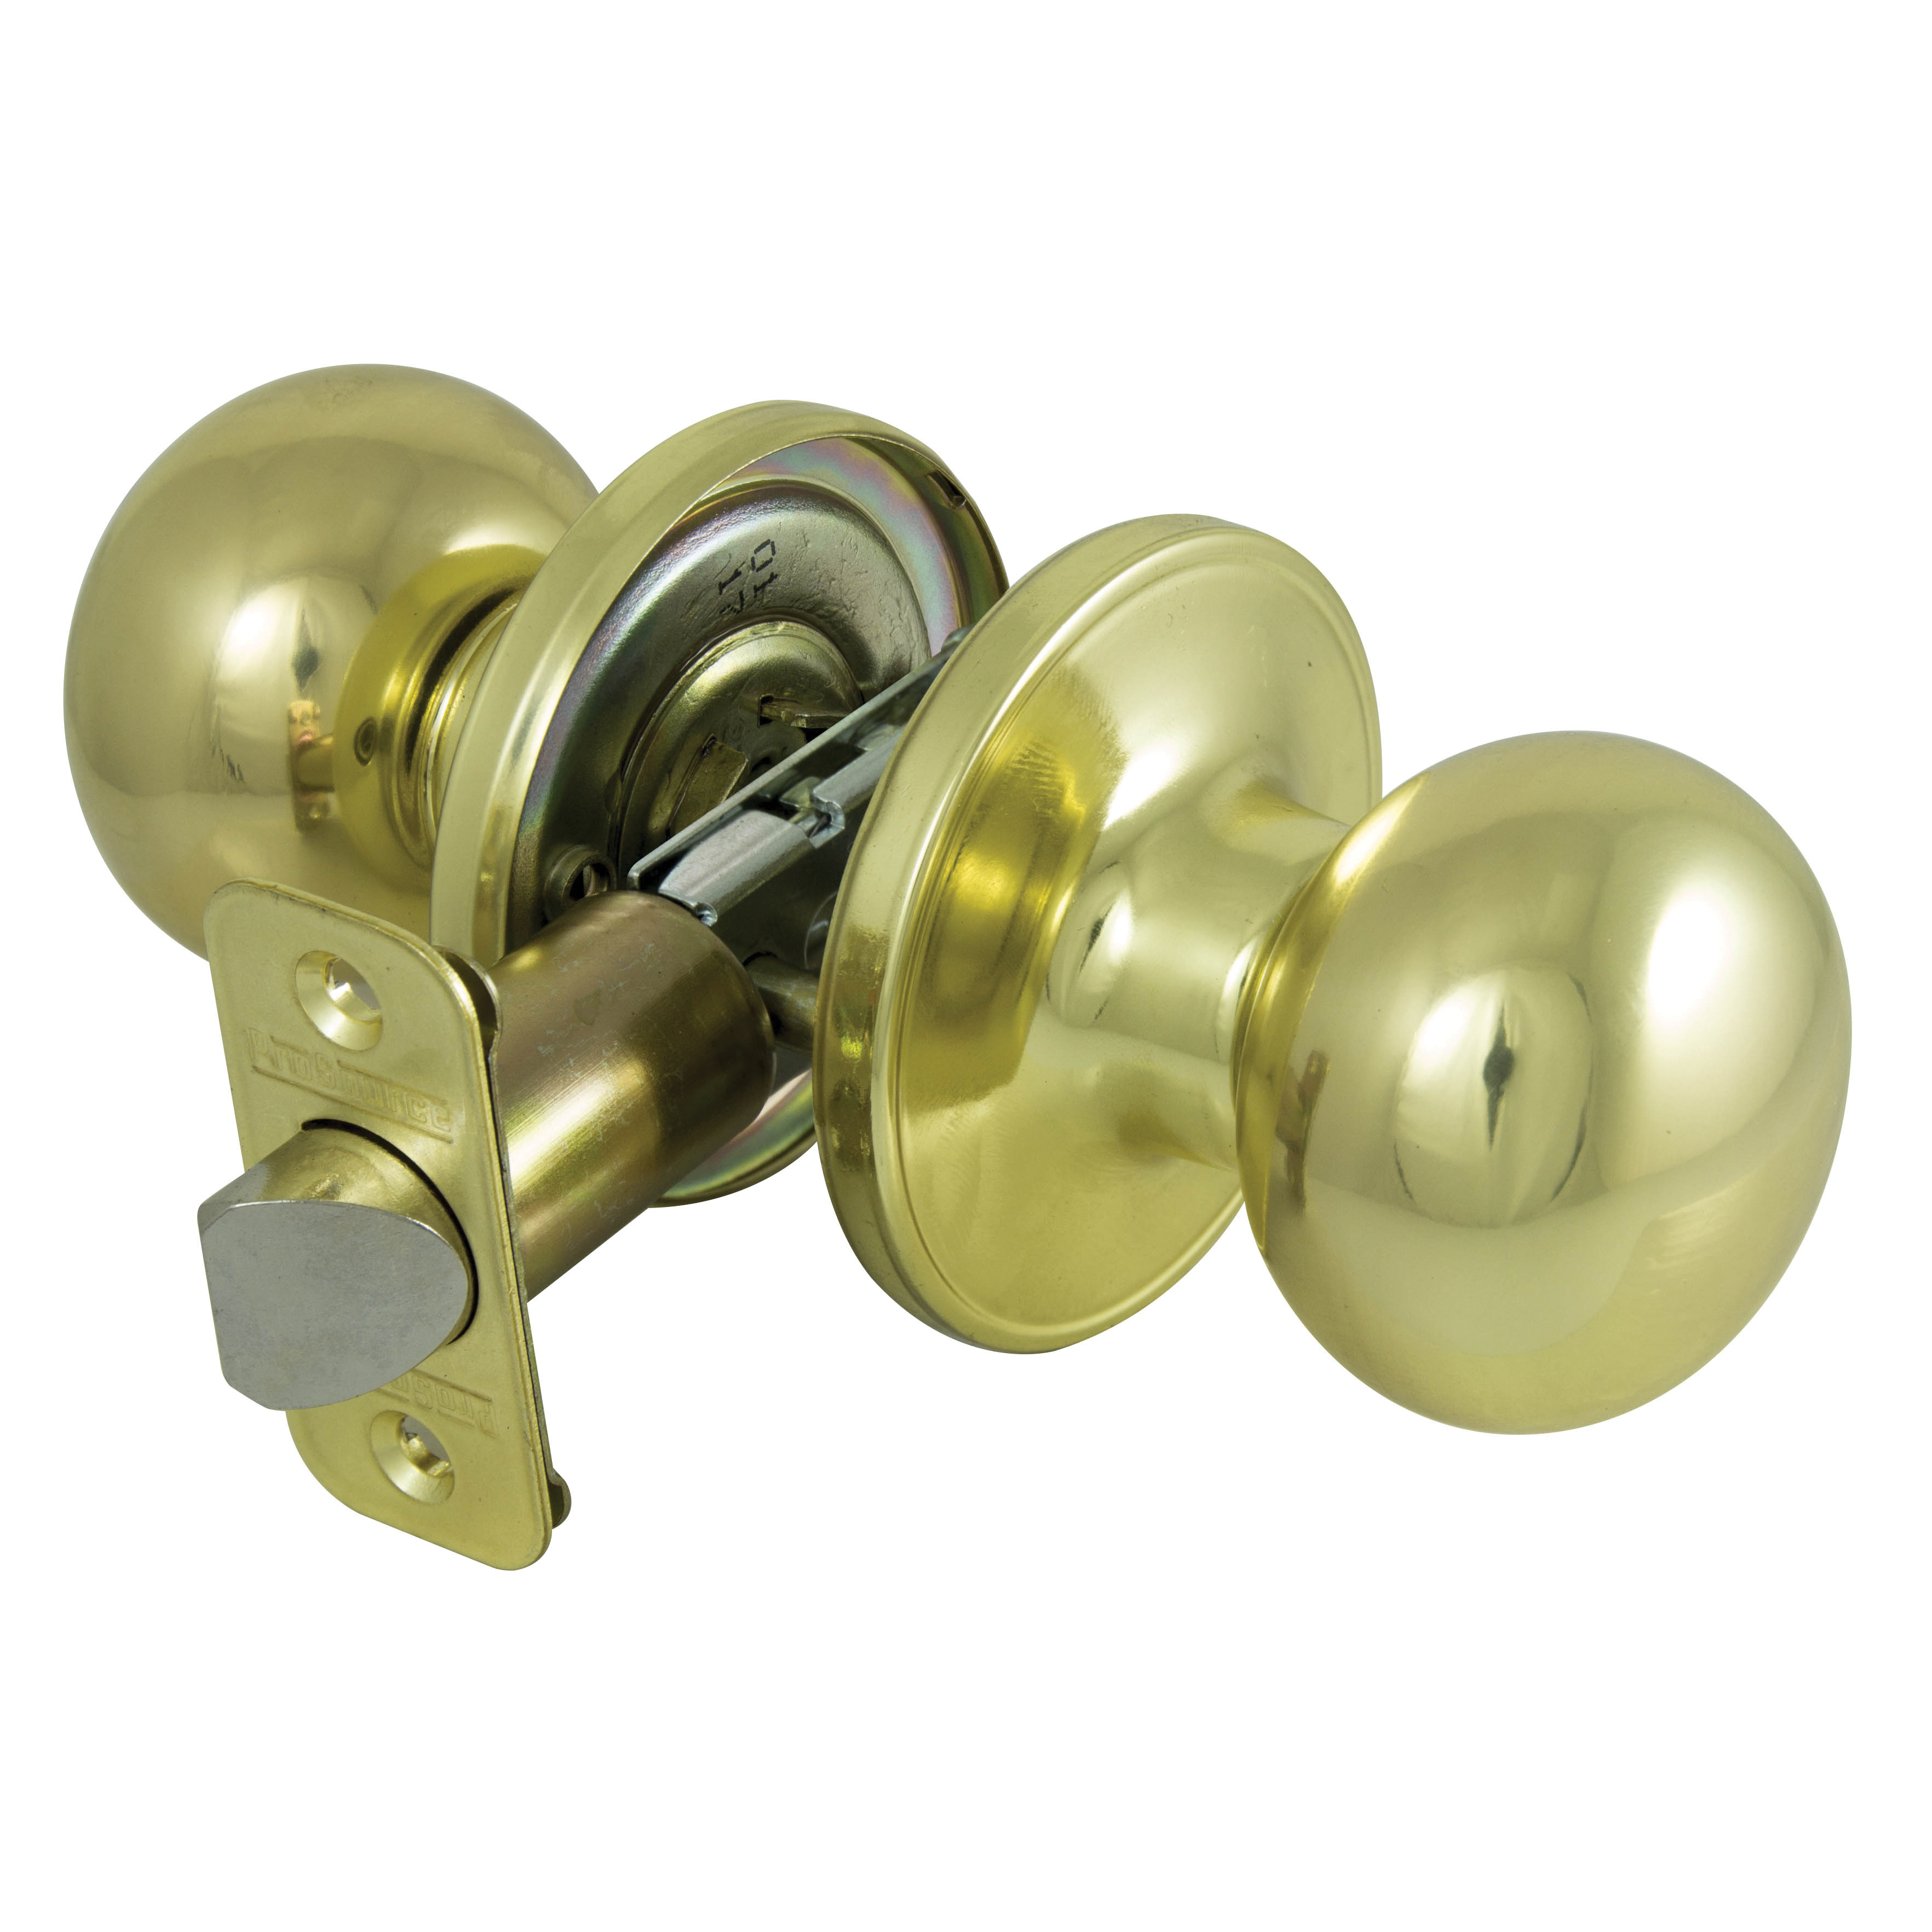 T9730BRA4V Passage Knob, Metal, Polished Brass, 2-3/8 to 2-3/4 in Backset, 1-3/8 to 1-3/4 in Thick Door